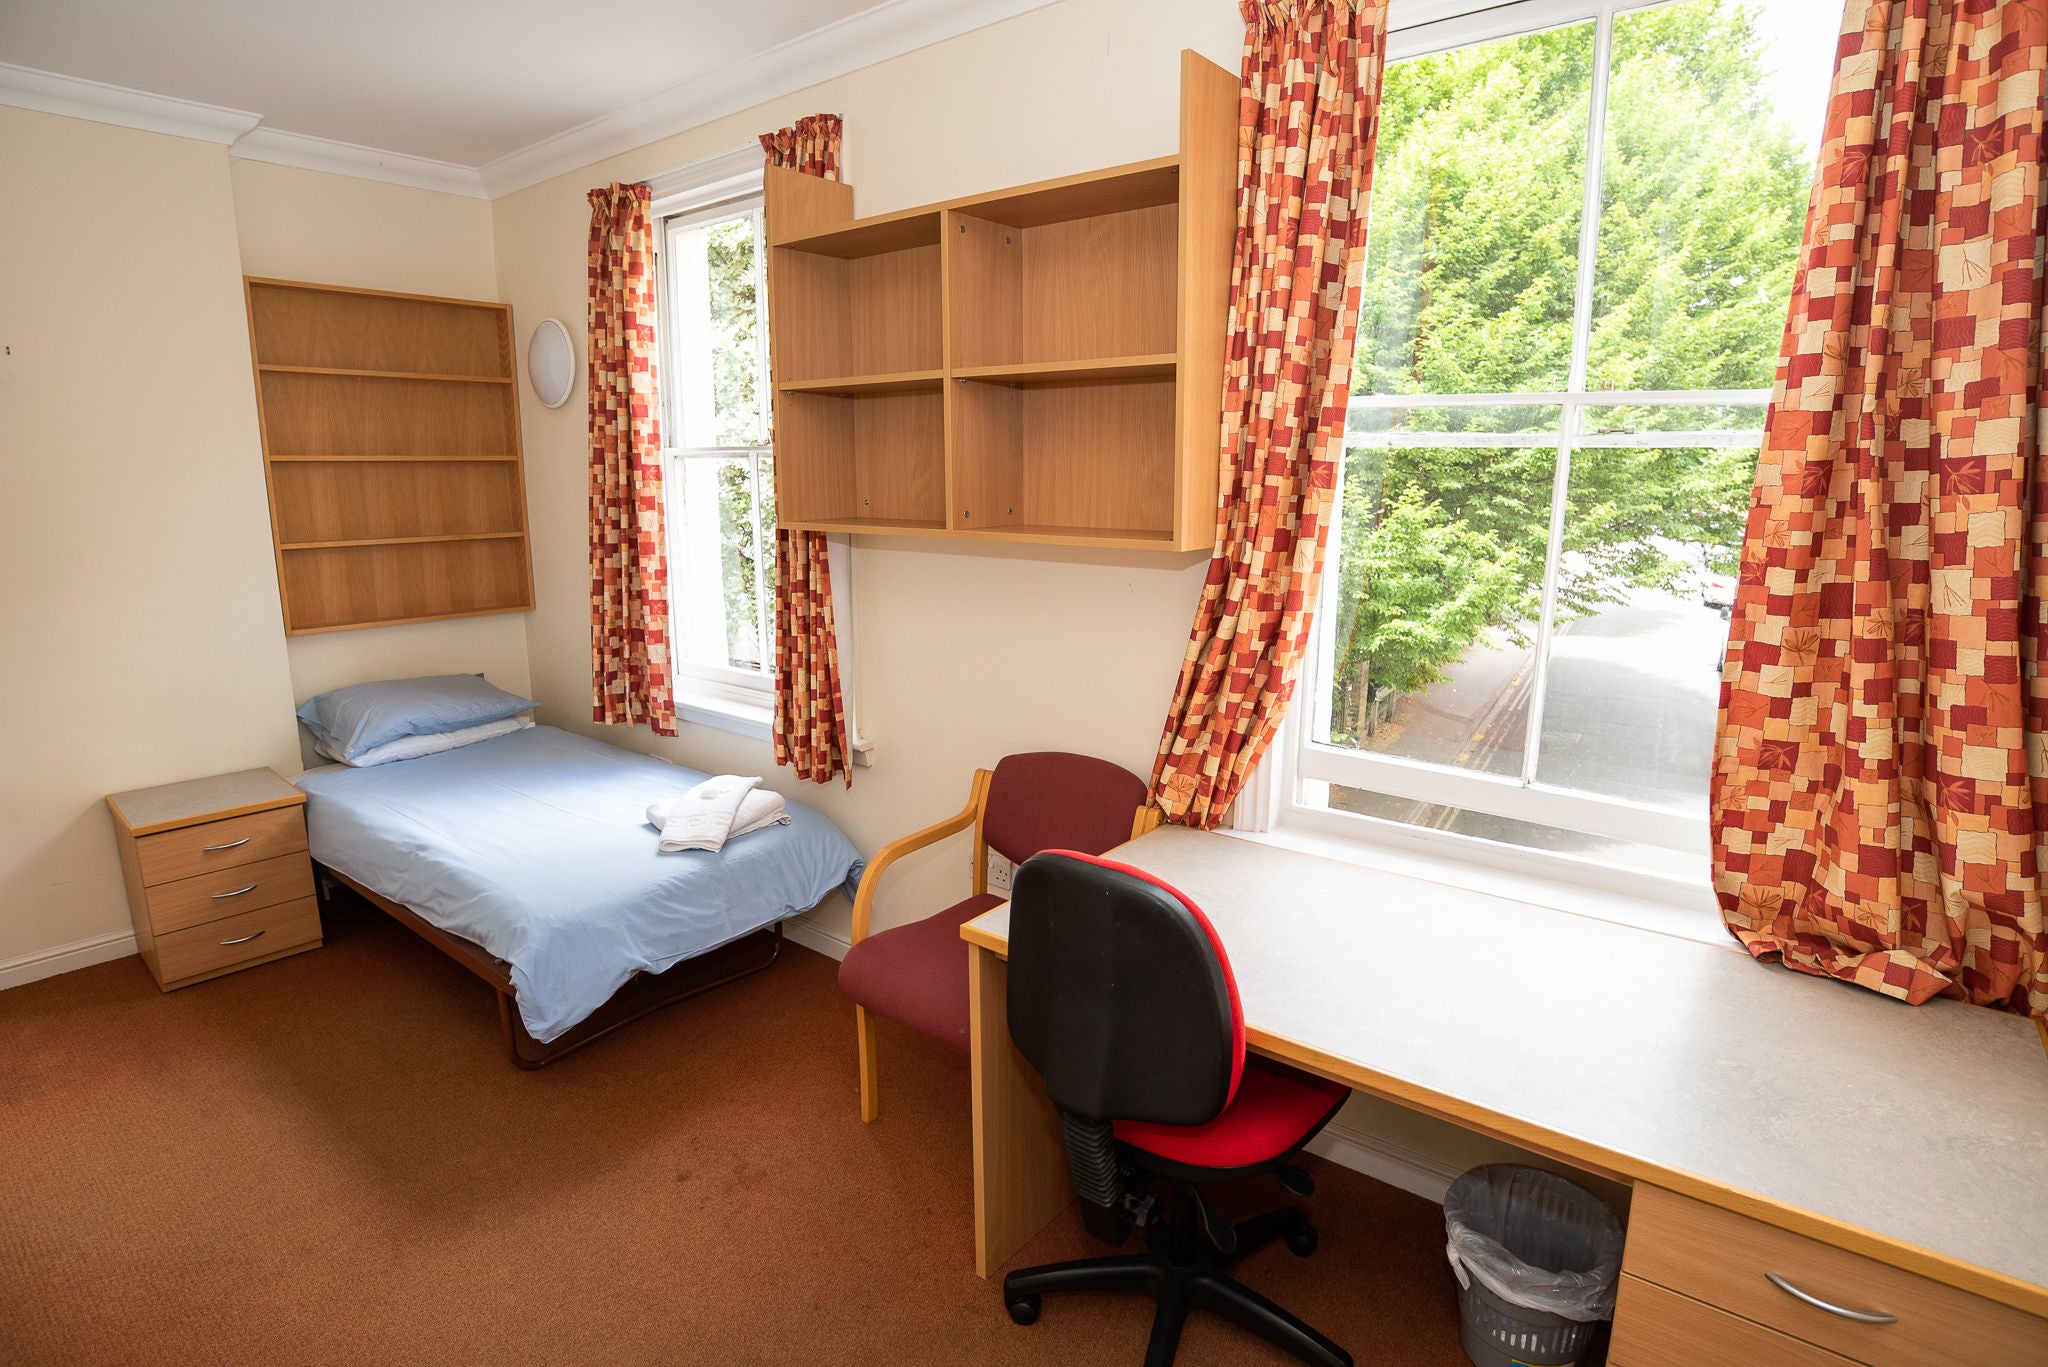 Summer school accommodation in Lincoln college, part of the University of Oxford